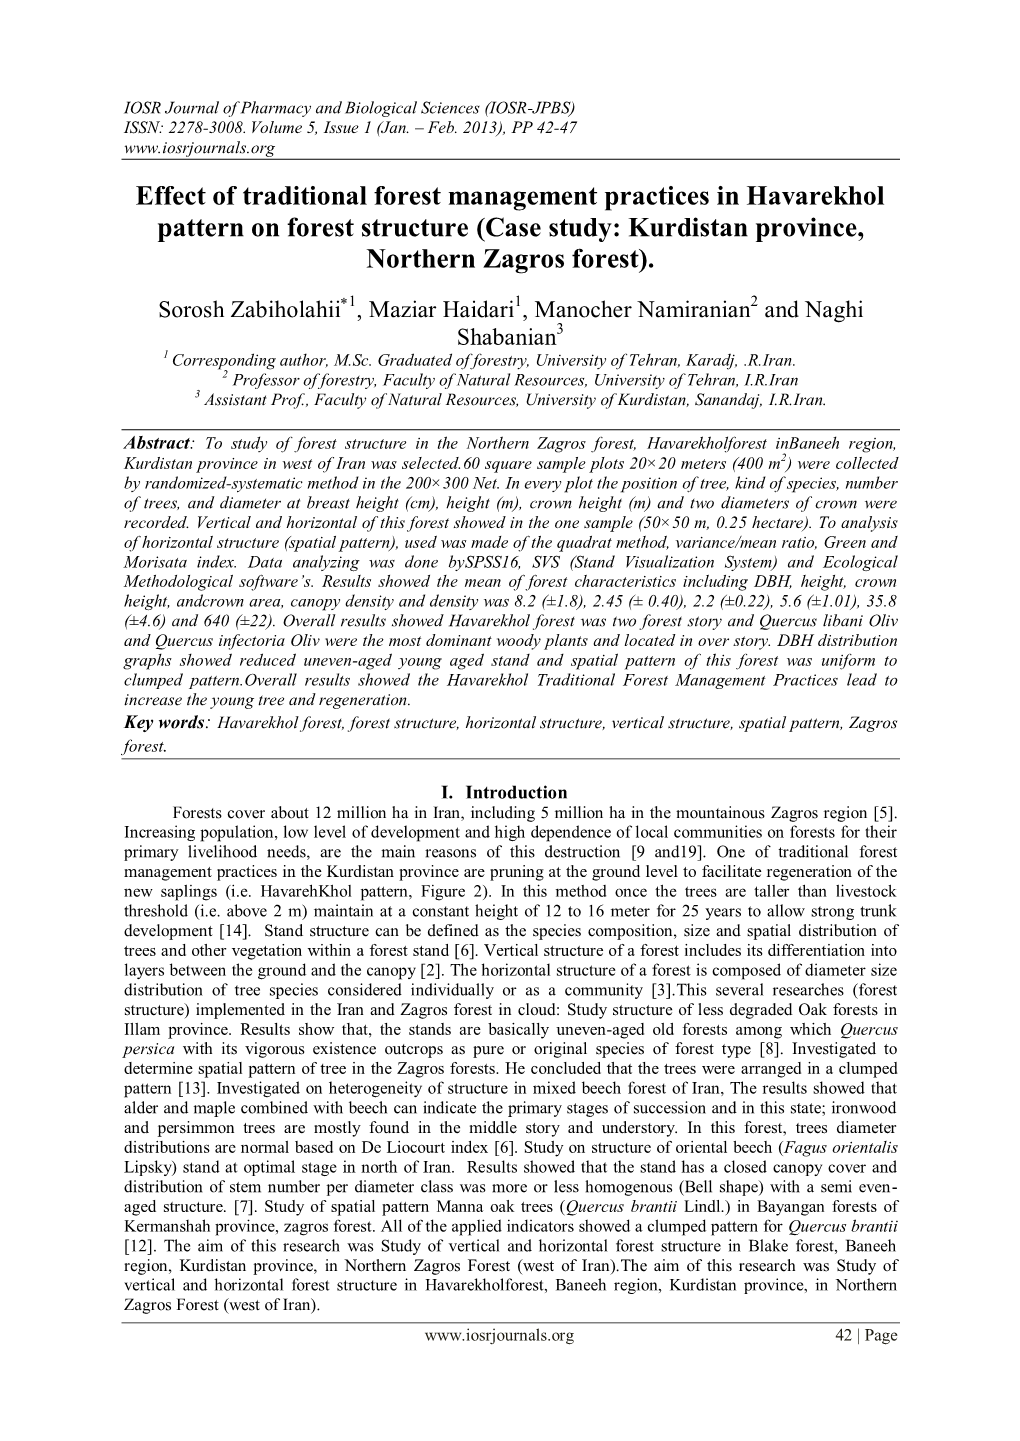 Effect of Traditional Forest Management Practices in Havarekhol Pattern on Forest Structure (Case Study: Kurdistan Province, Northern Zagros Forest)